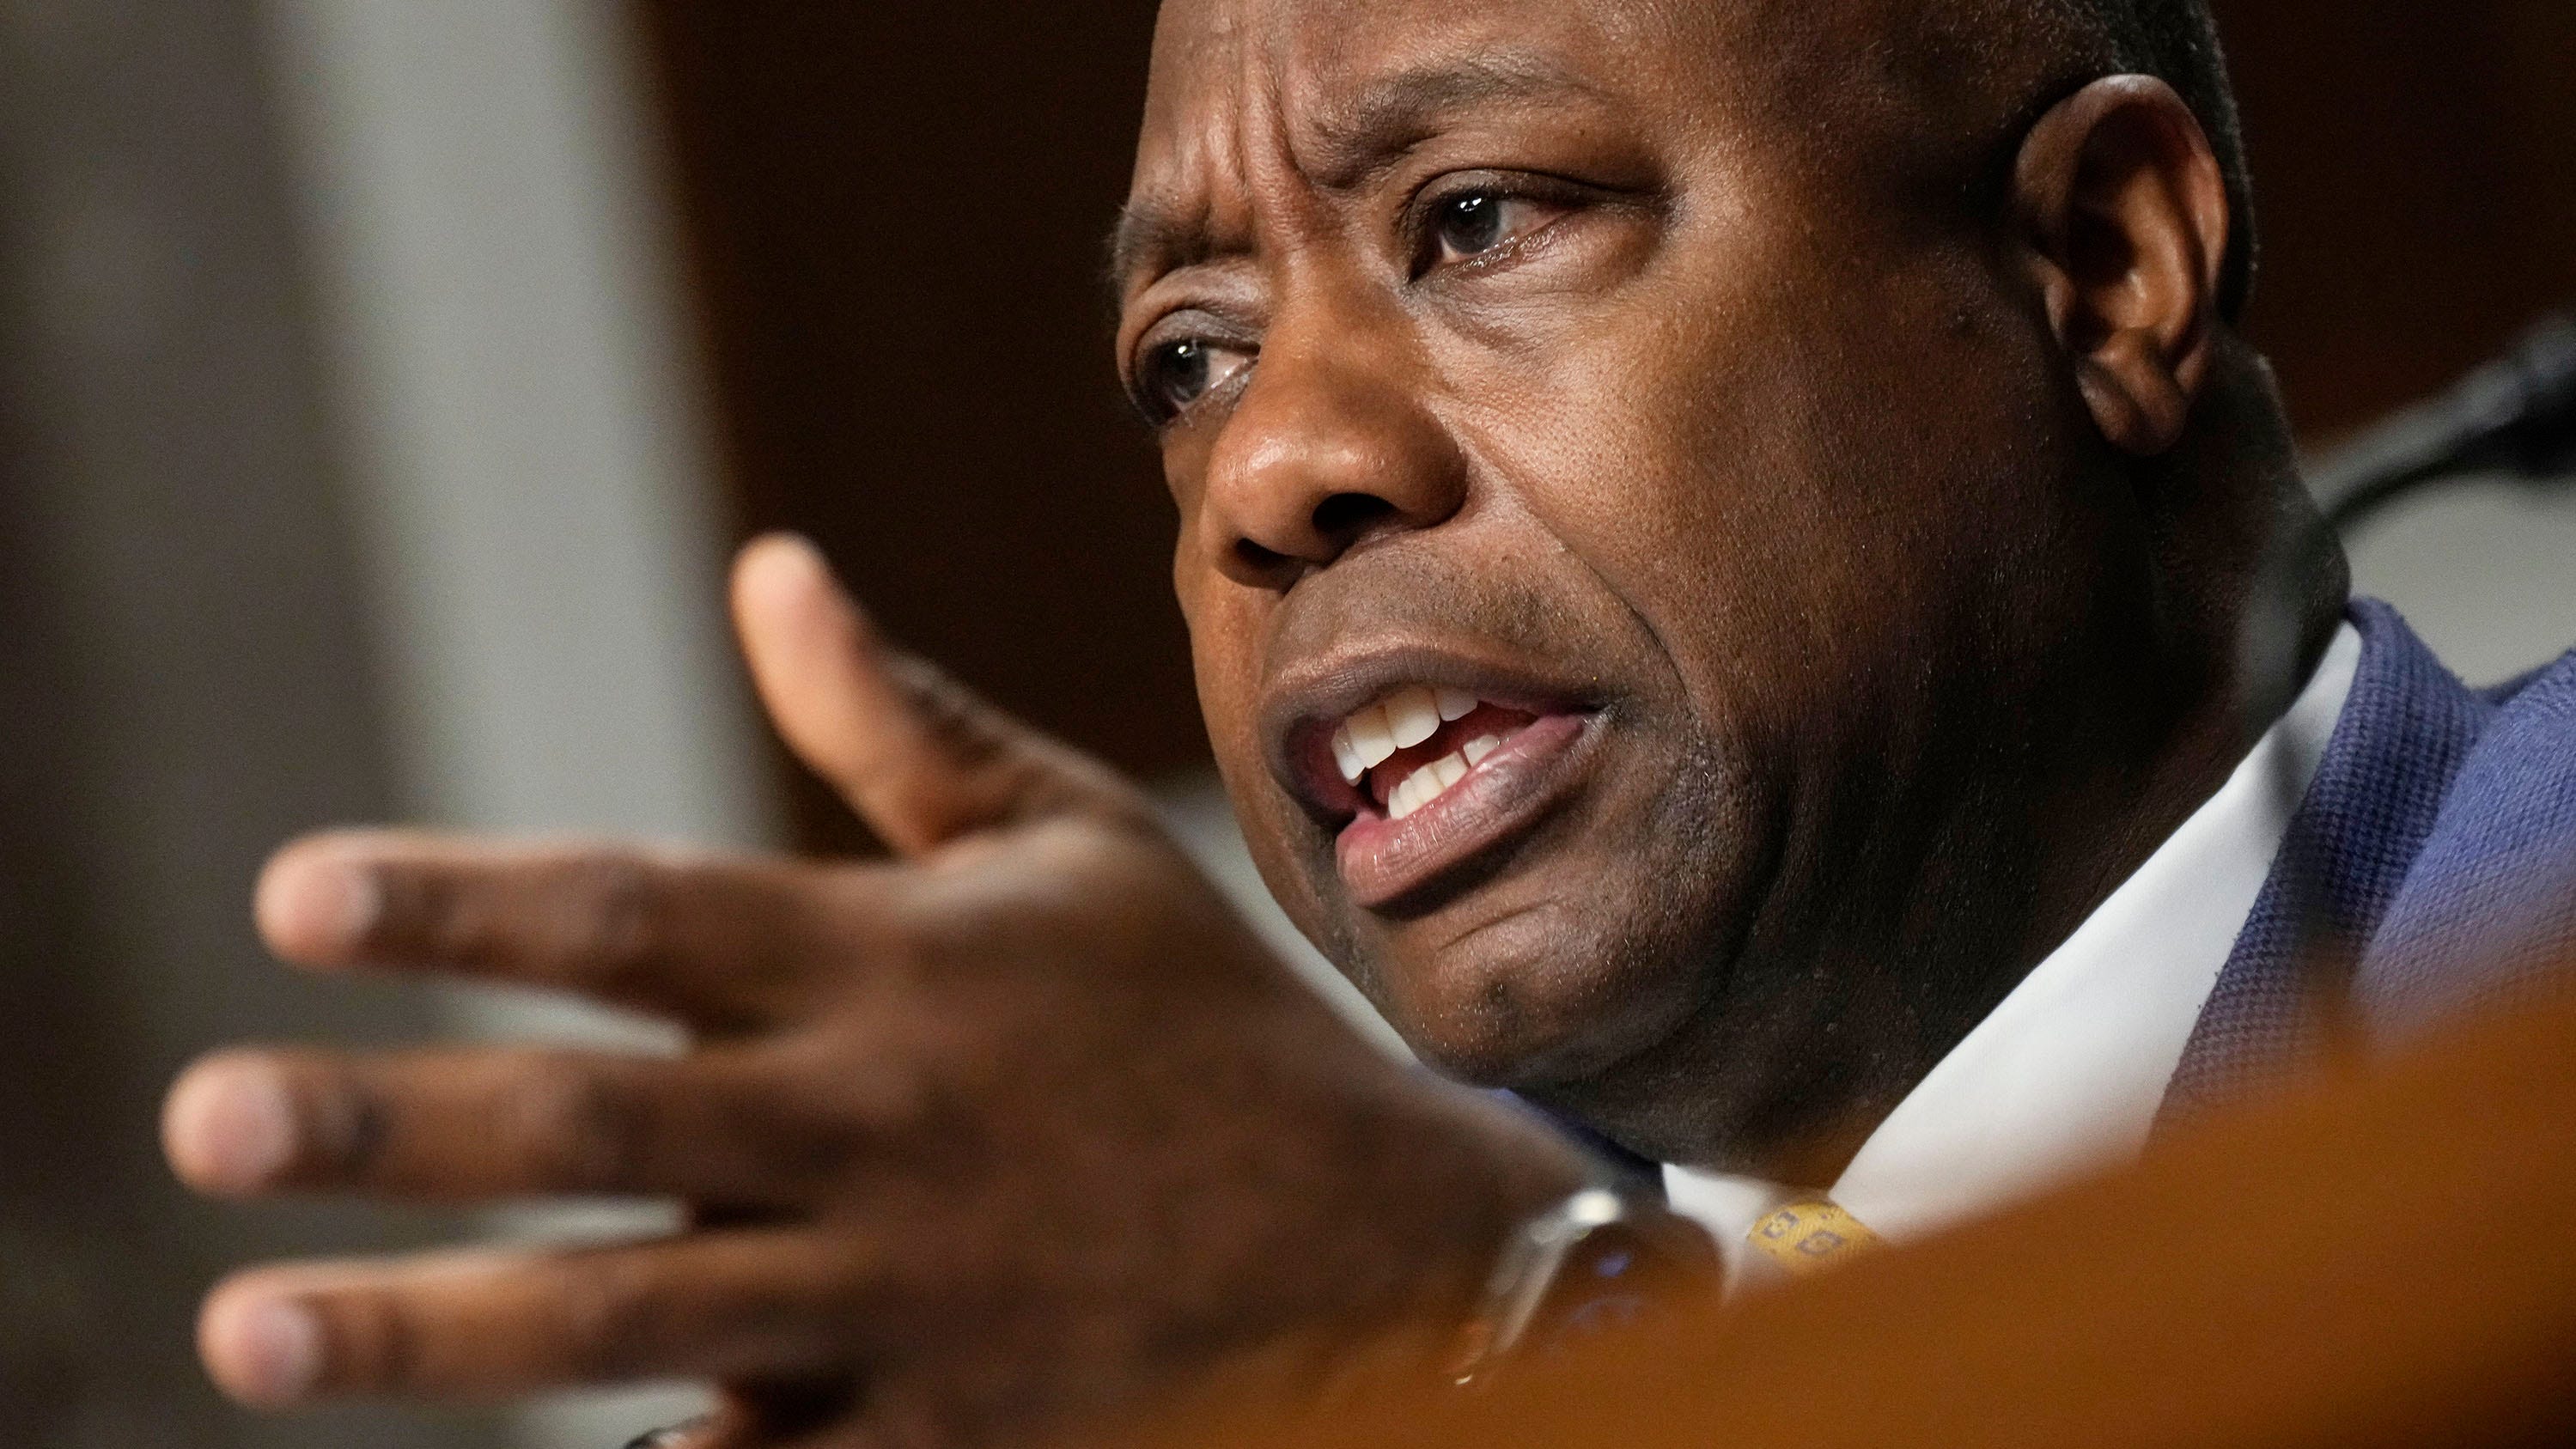 Committee ranking member Sen. Tim Scott (R-SC) questions former executives of failed banks during a Senate Banking Committee hearing on Capitol Hill May 16, 2023 in Washington, DC. The hearing was held to examine the recent failures of Silicon Valley Bank and Signature Bank. 